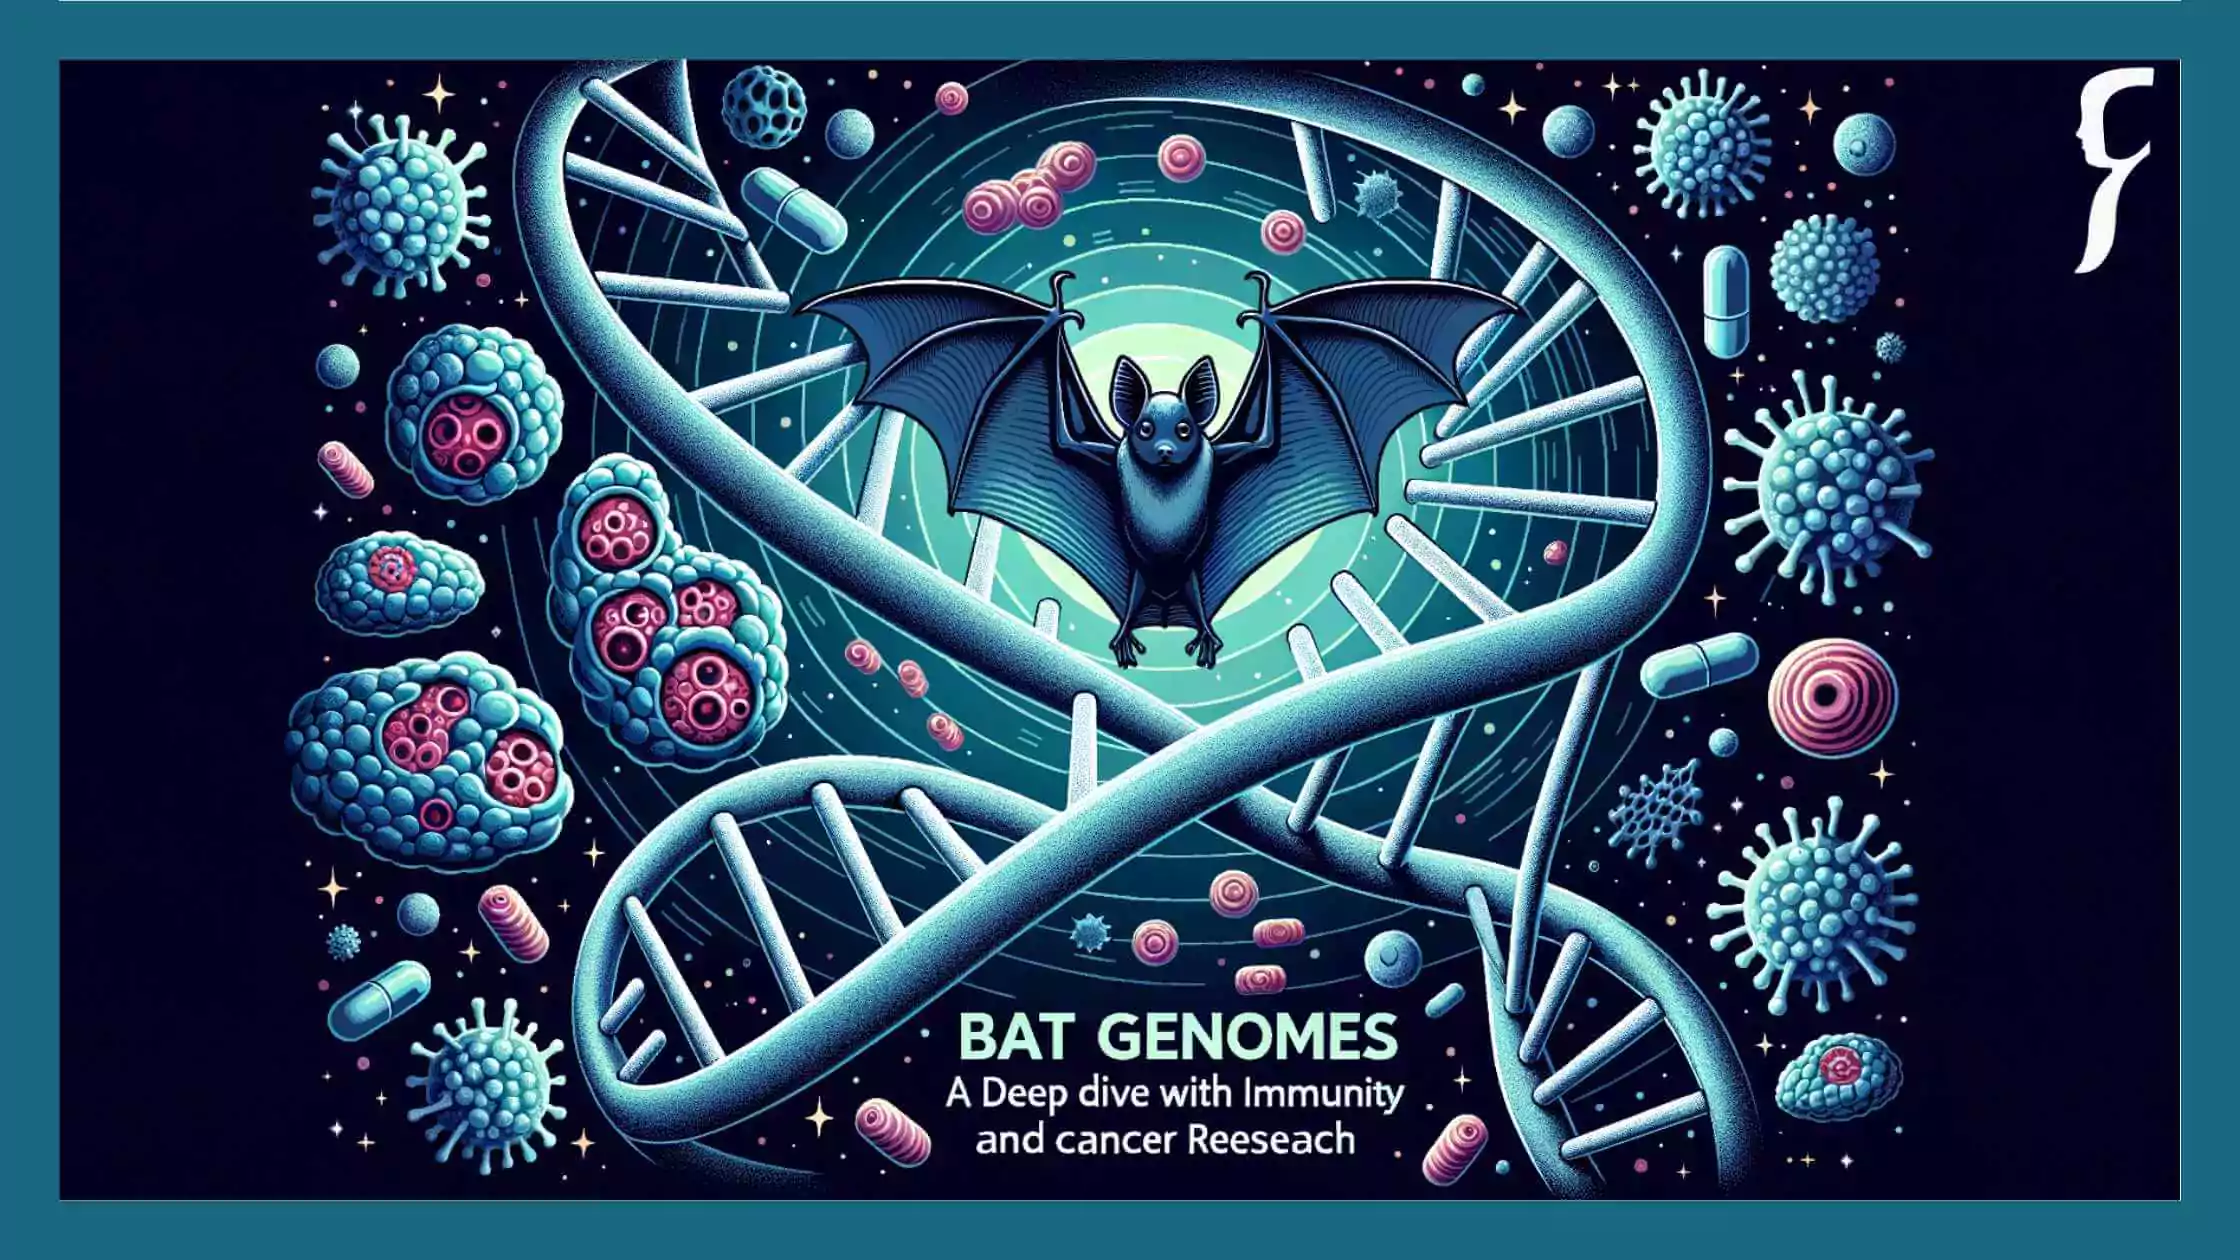 Bat genomes can provide insights into immunity and cancer